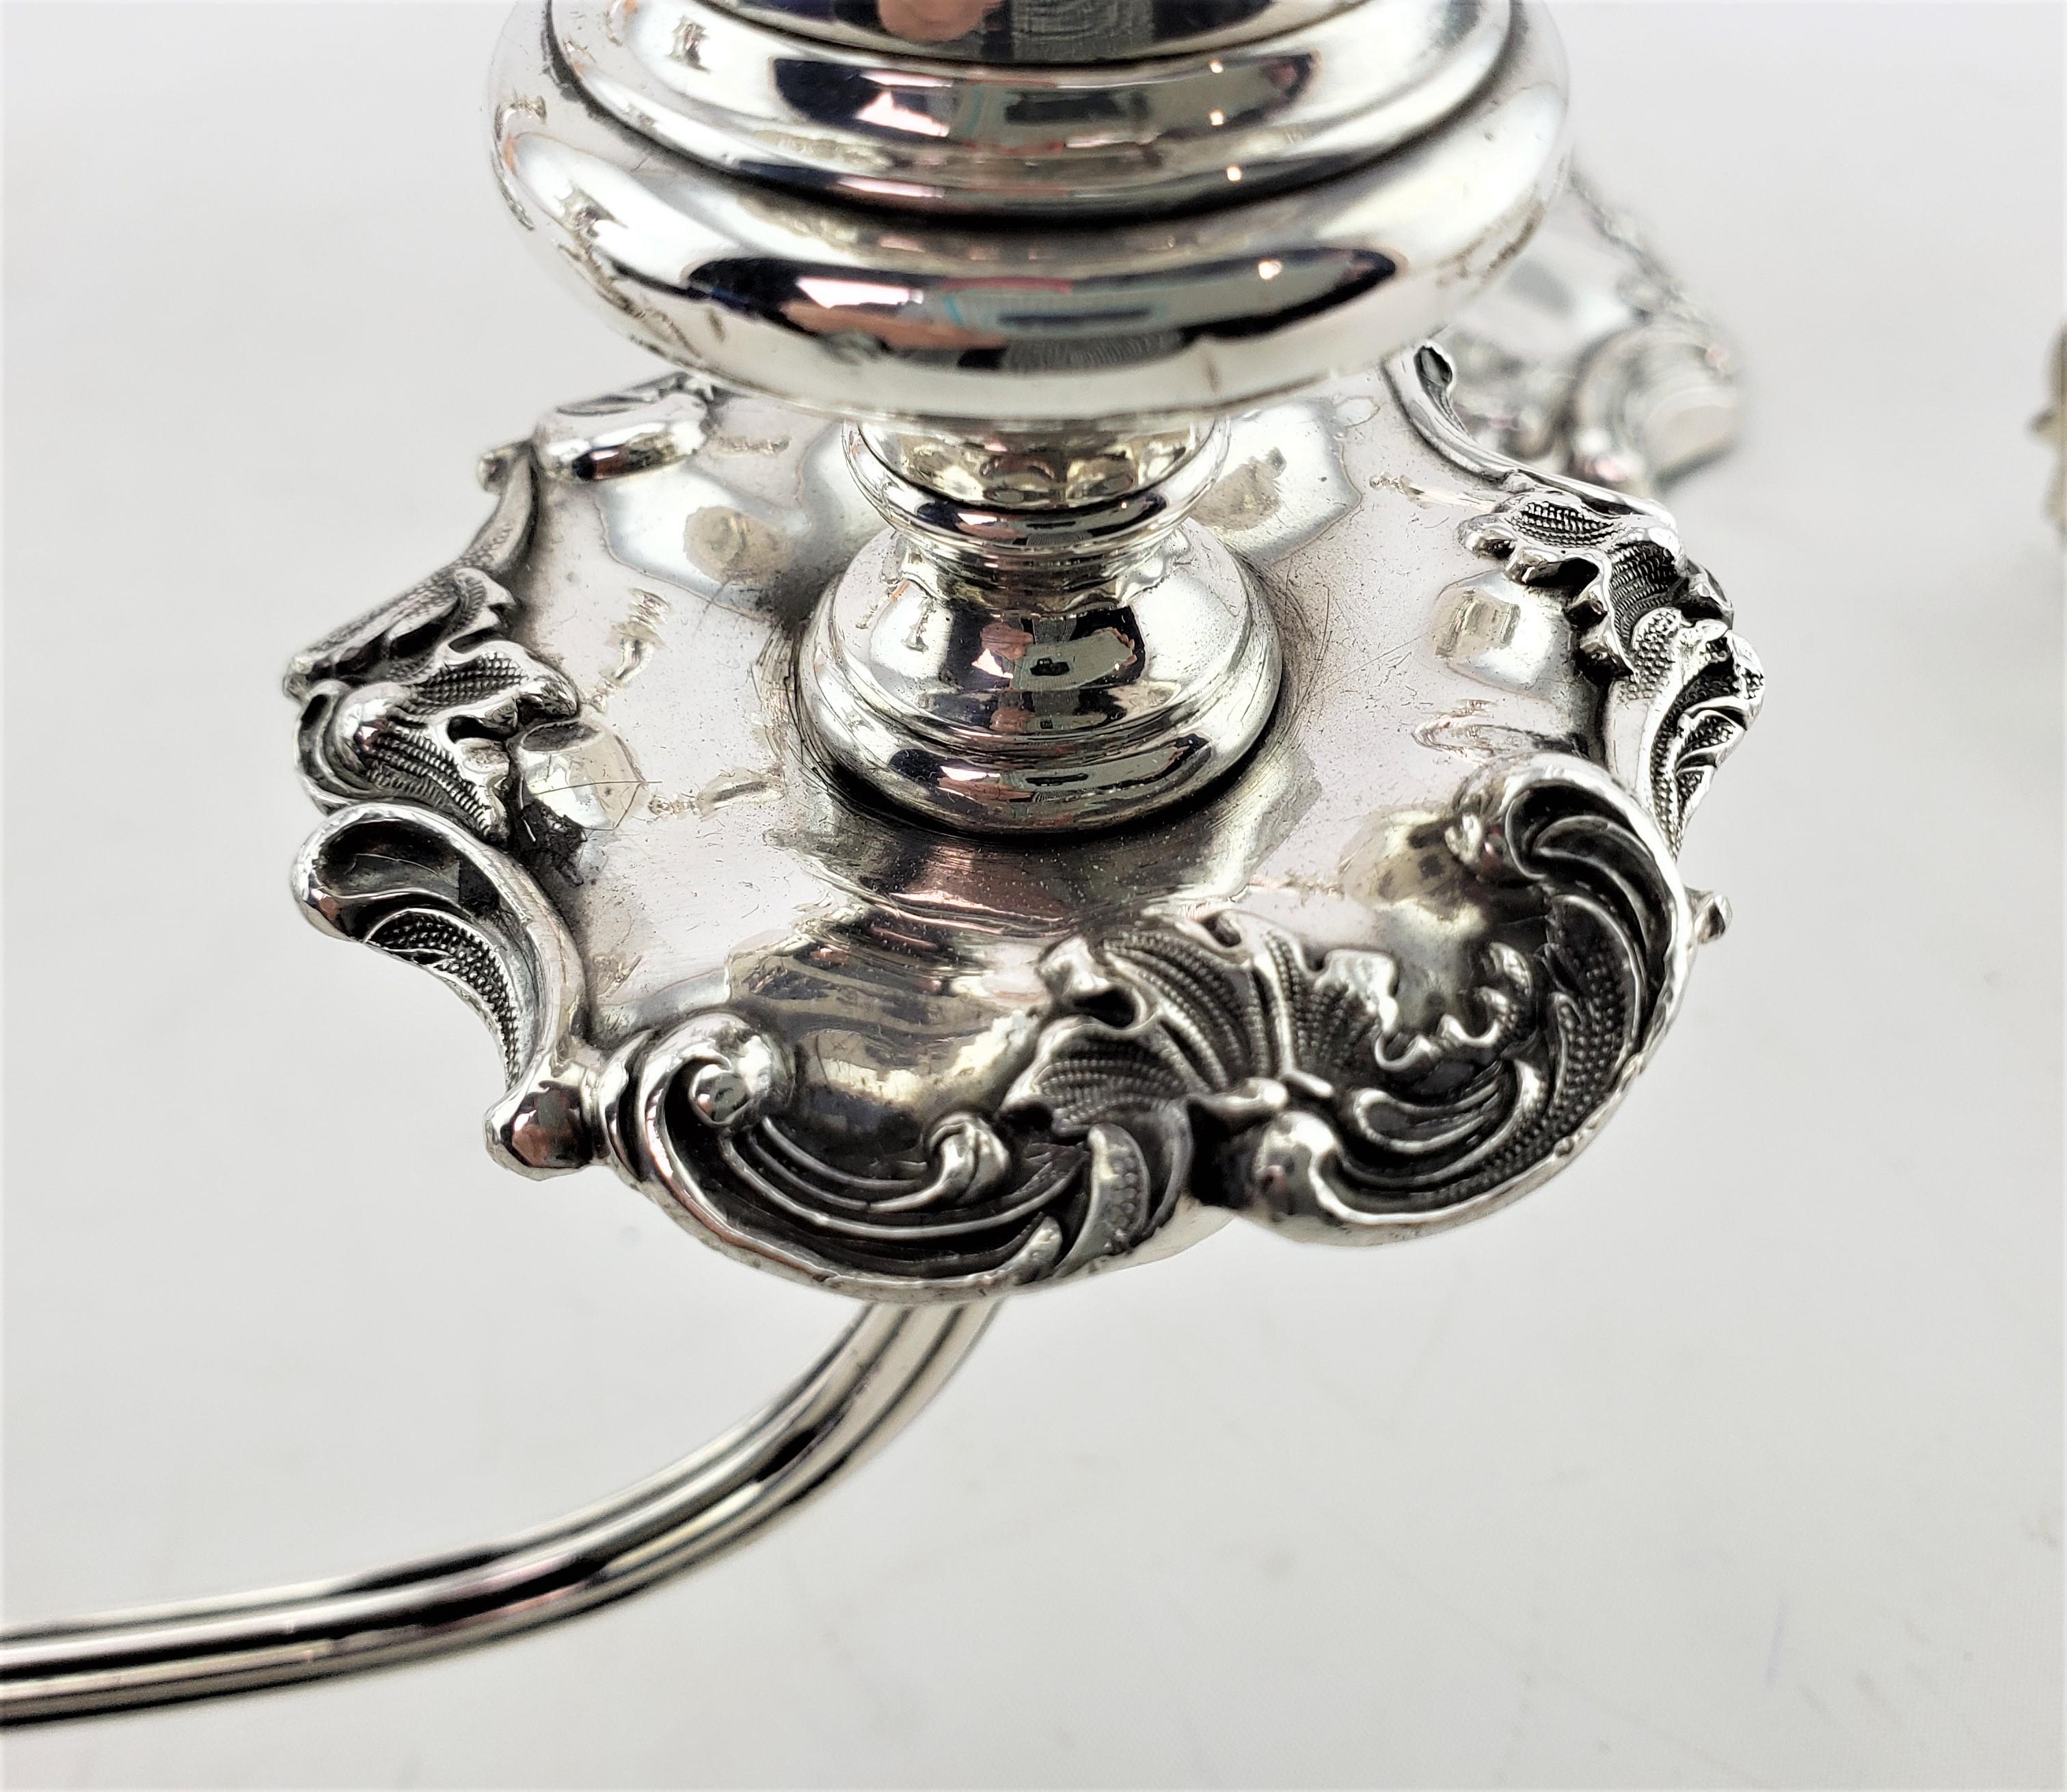 Antique Silver Plated Convertible Candelabras or Candlesticks with Leaf Decor For Sale 6